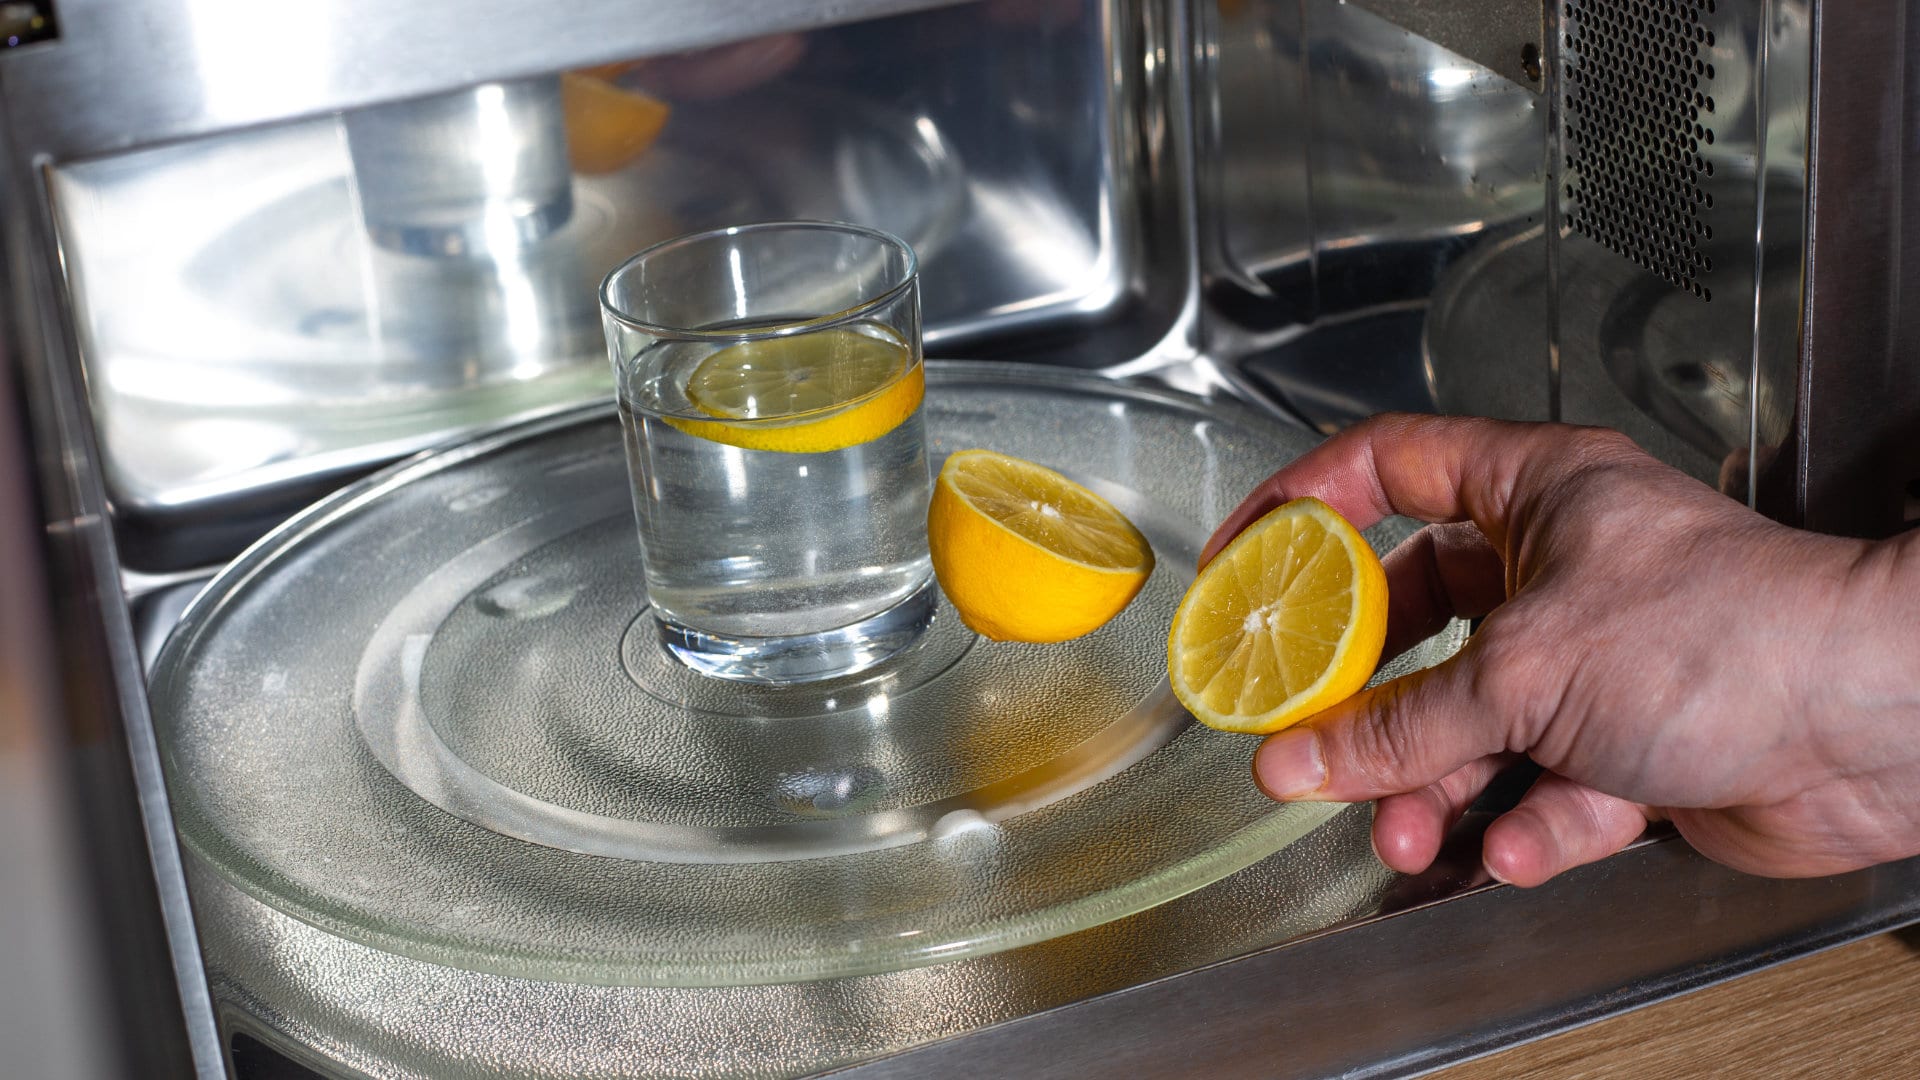 8 Best Ways To Get Rid Of Gross Smells In Your Microwave